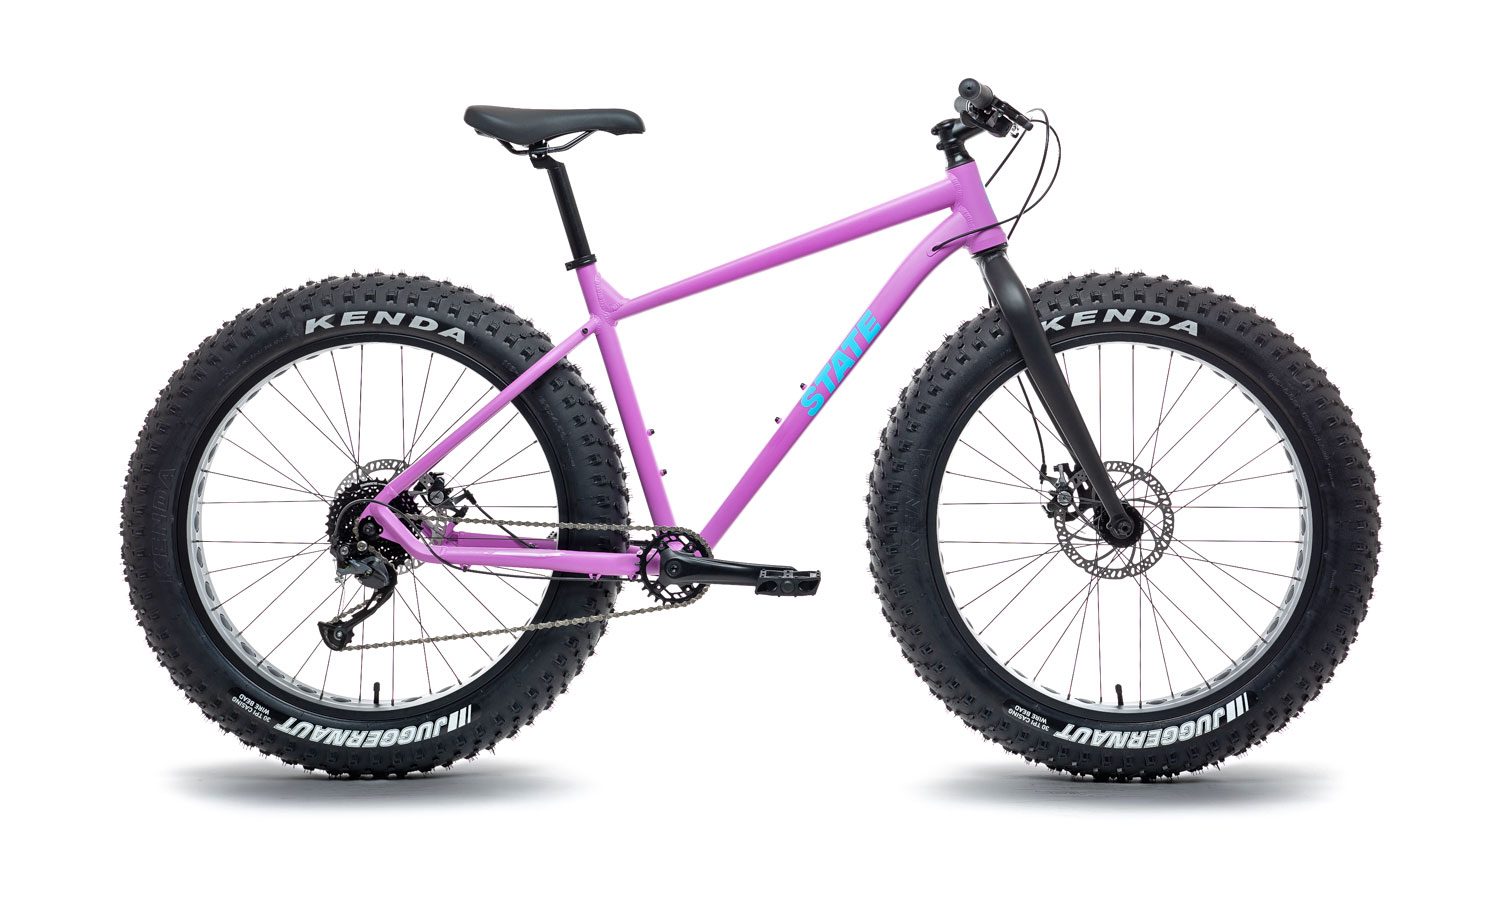 State Bicycle Co. 6061 Trail+ Fat Bike, an affordable alloy budget entry-level aluminum fatbike, Wildberry